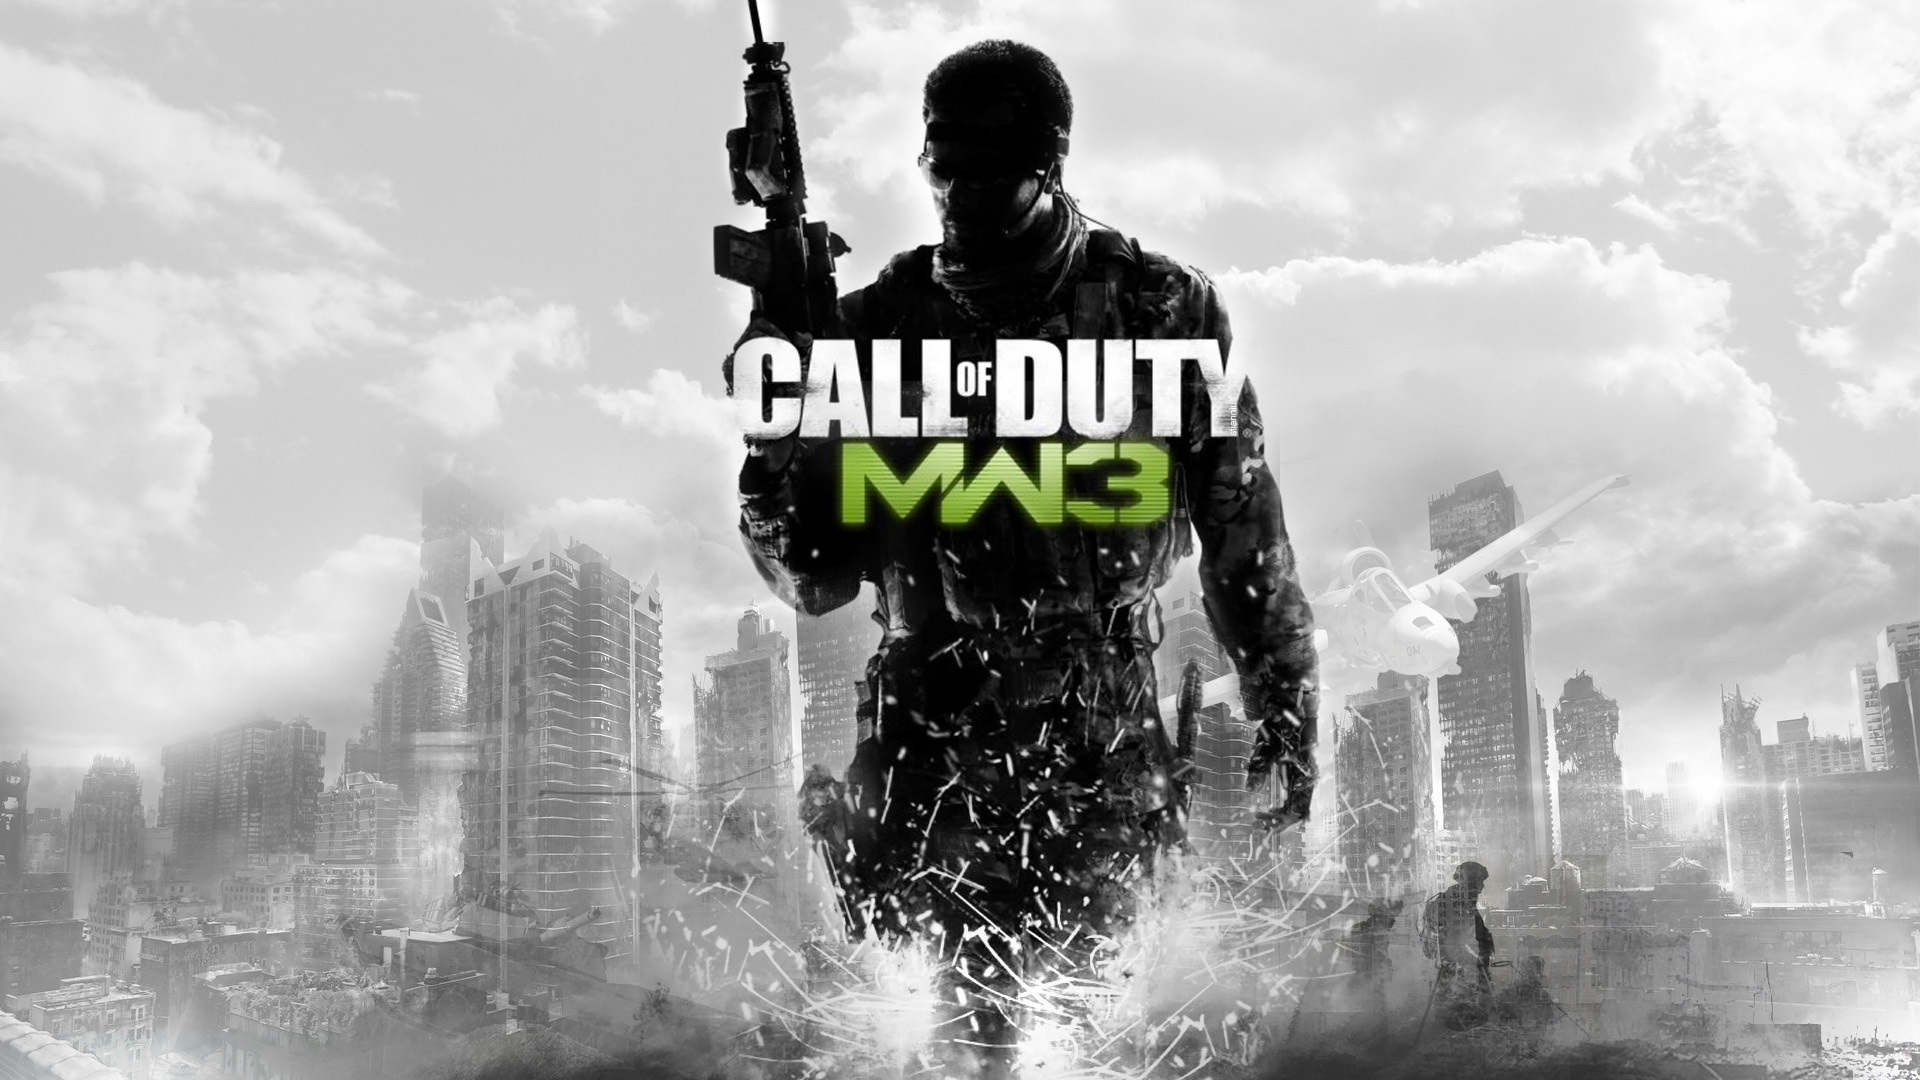 Games Wallpapers Call of Duty MW3 1920x1080jpg 1920x1080